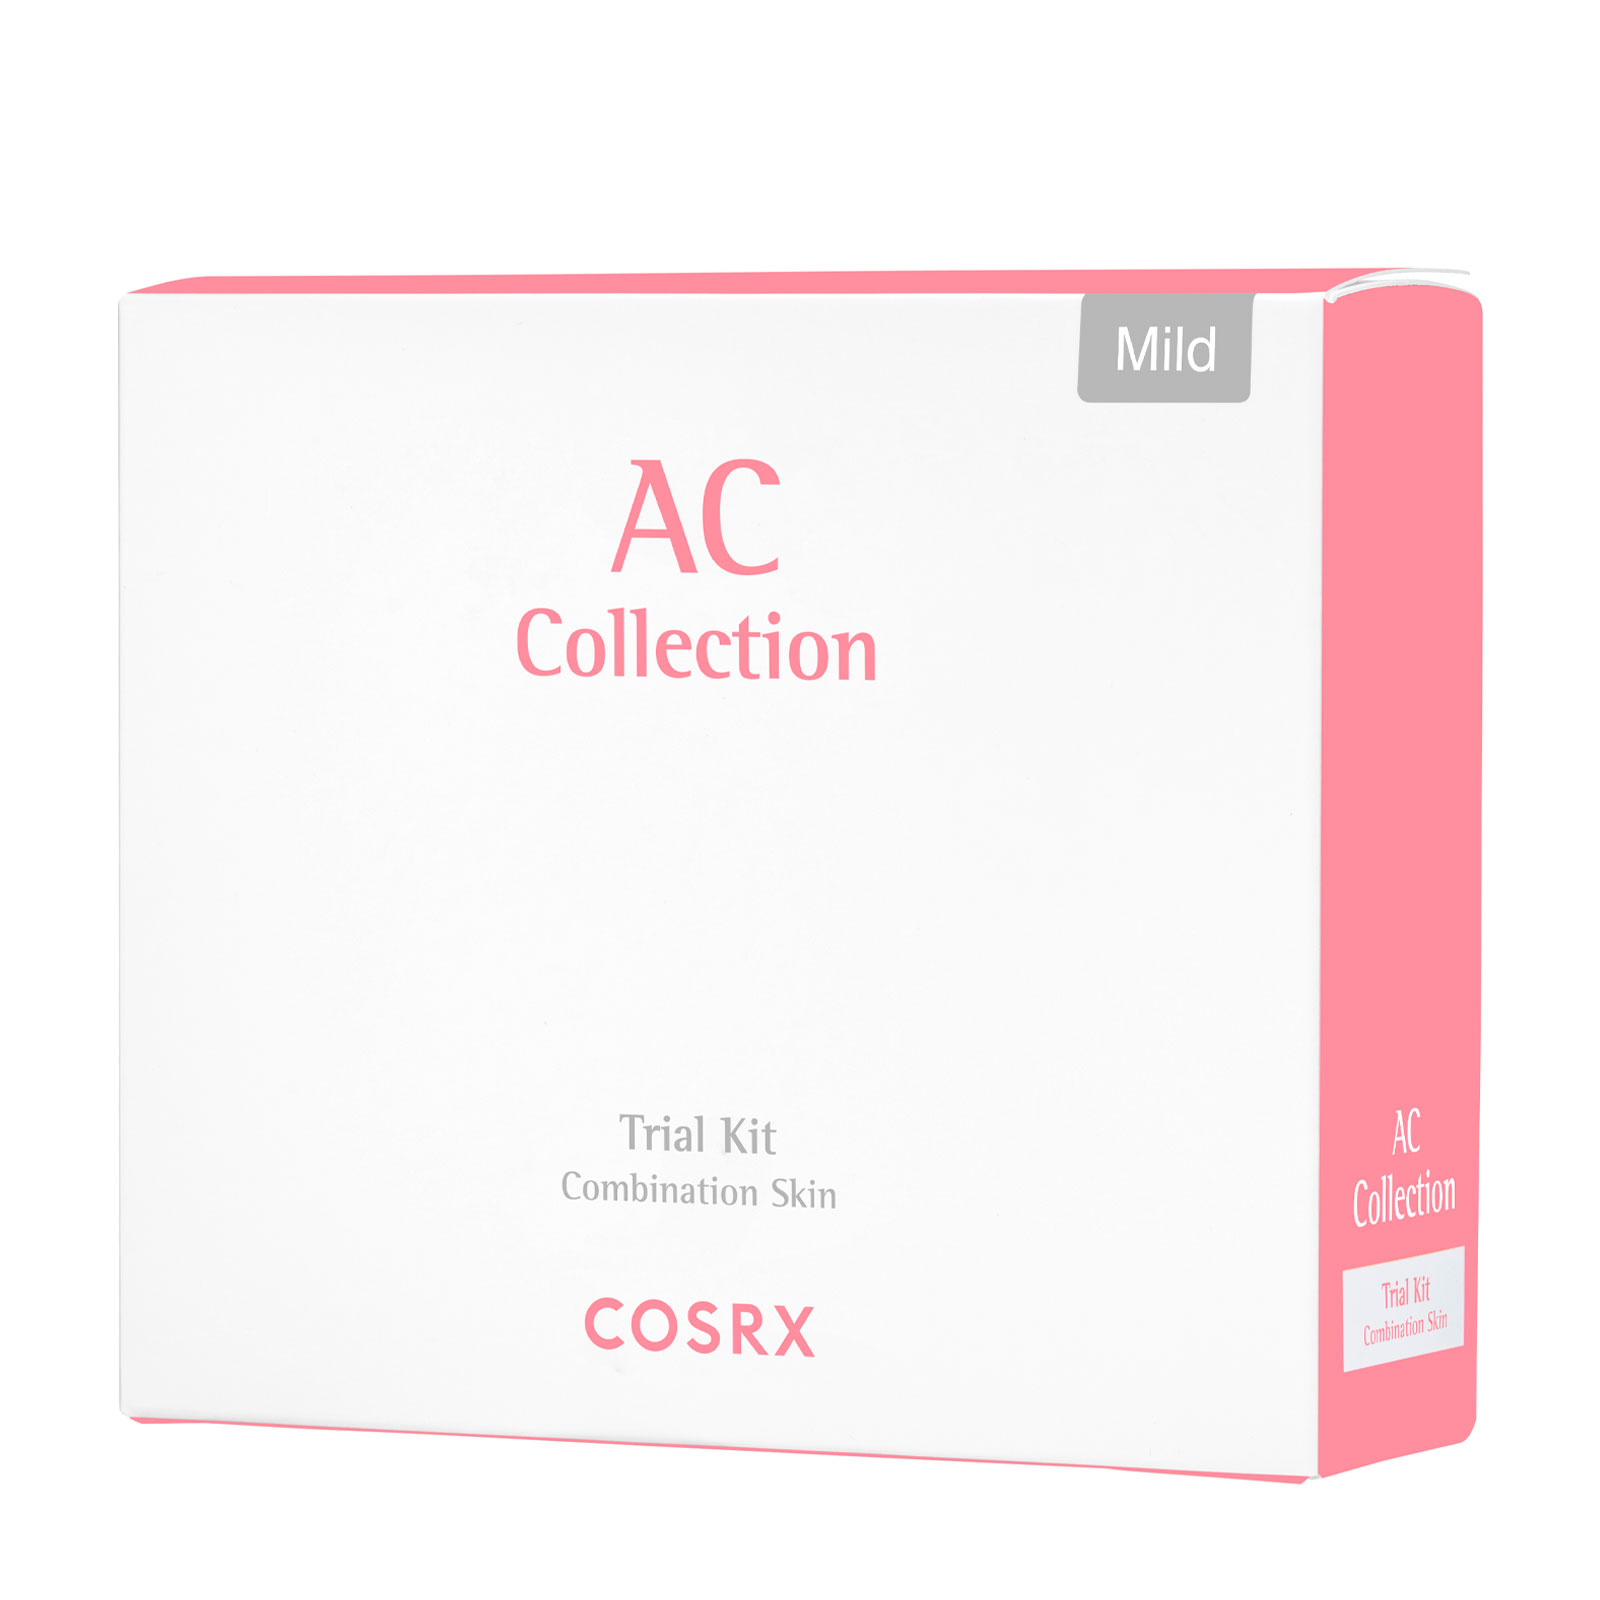 Cosrx Ac Collection Acne Hero Trial Kit - Mild